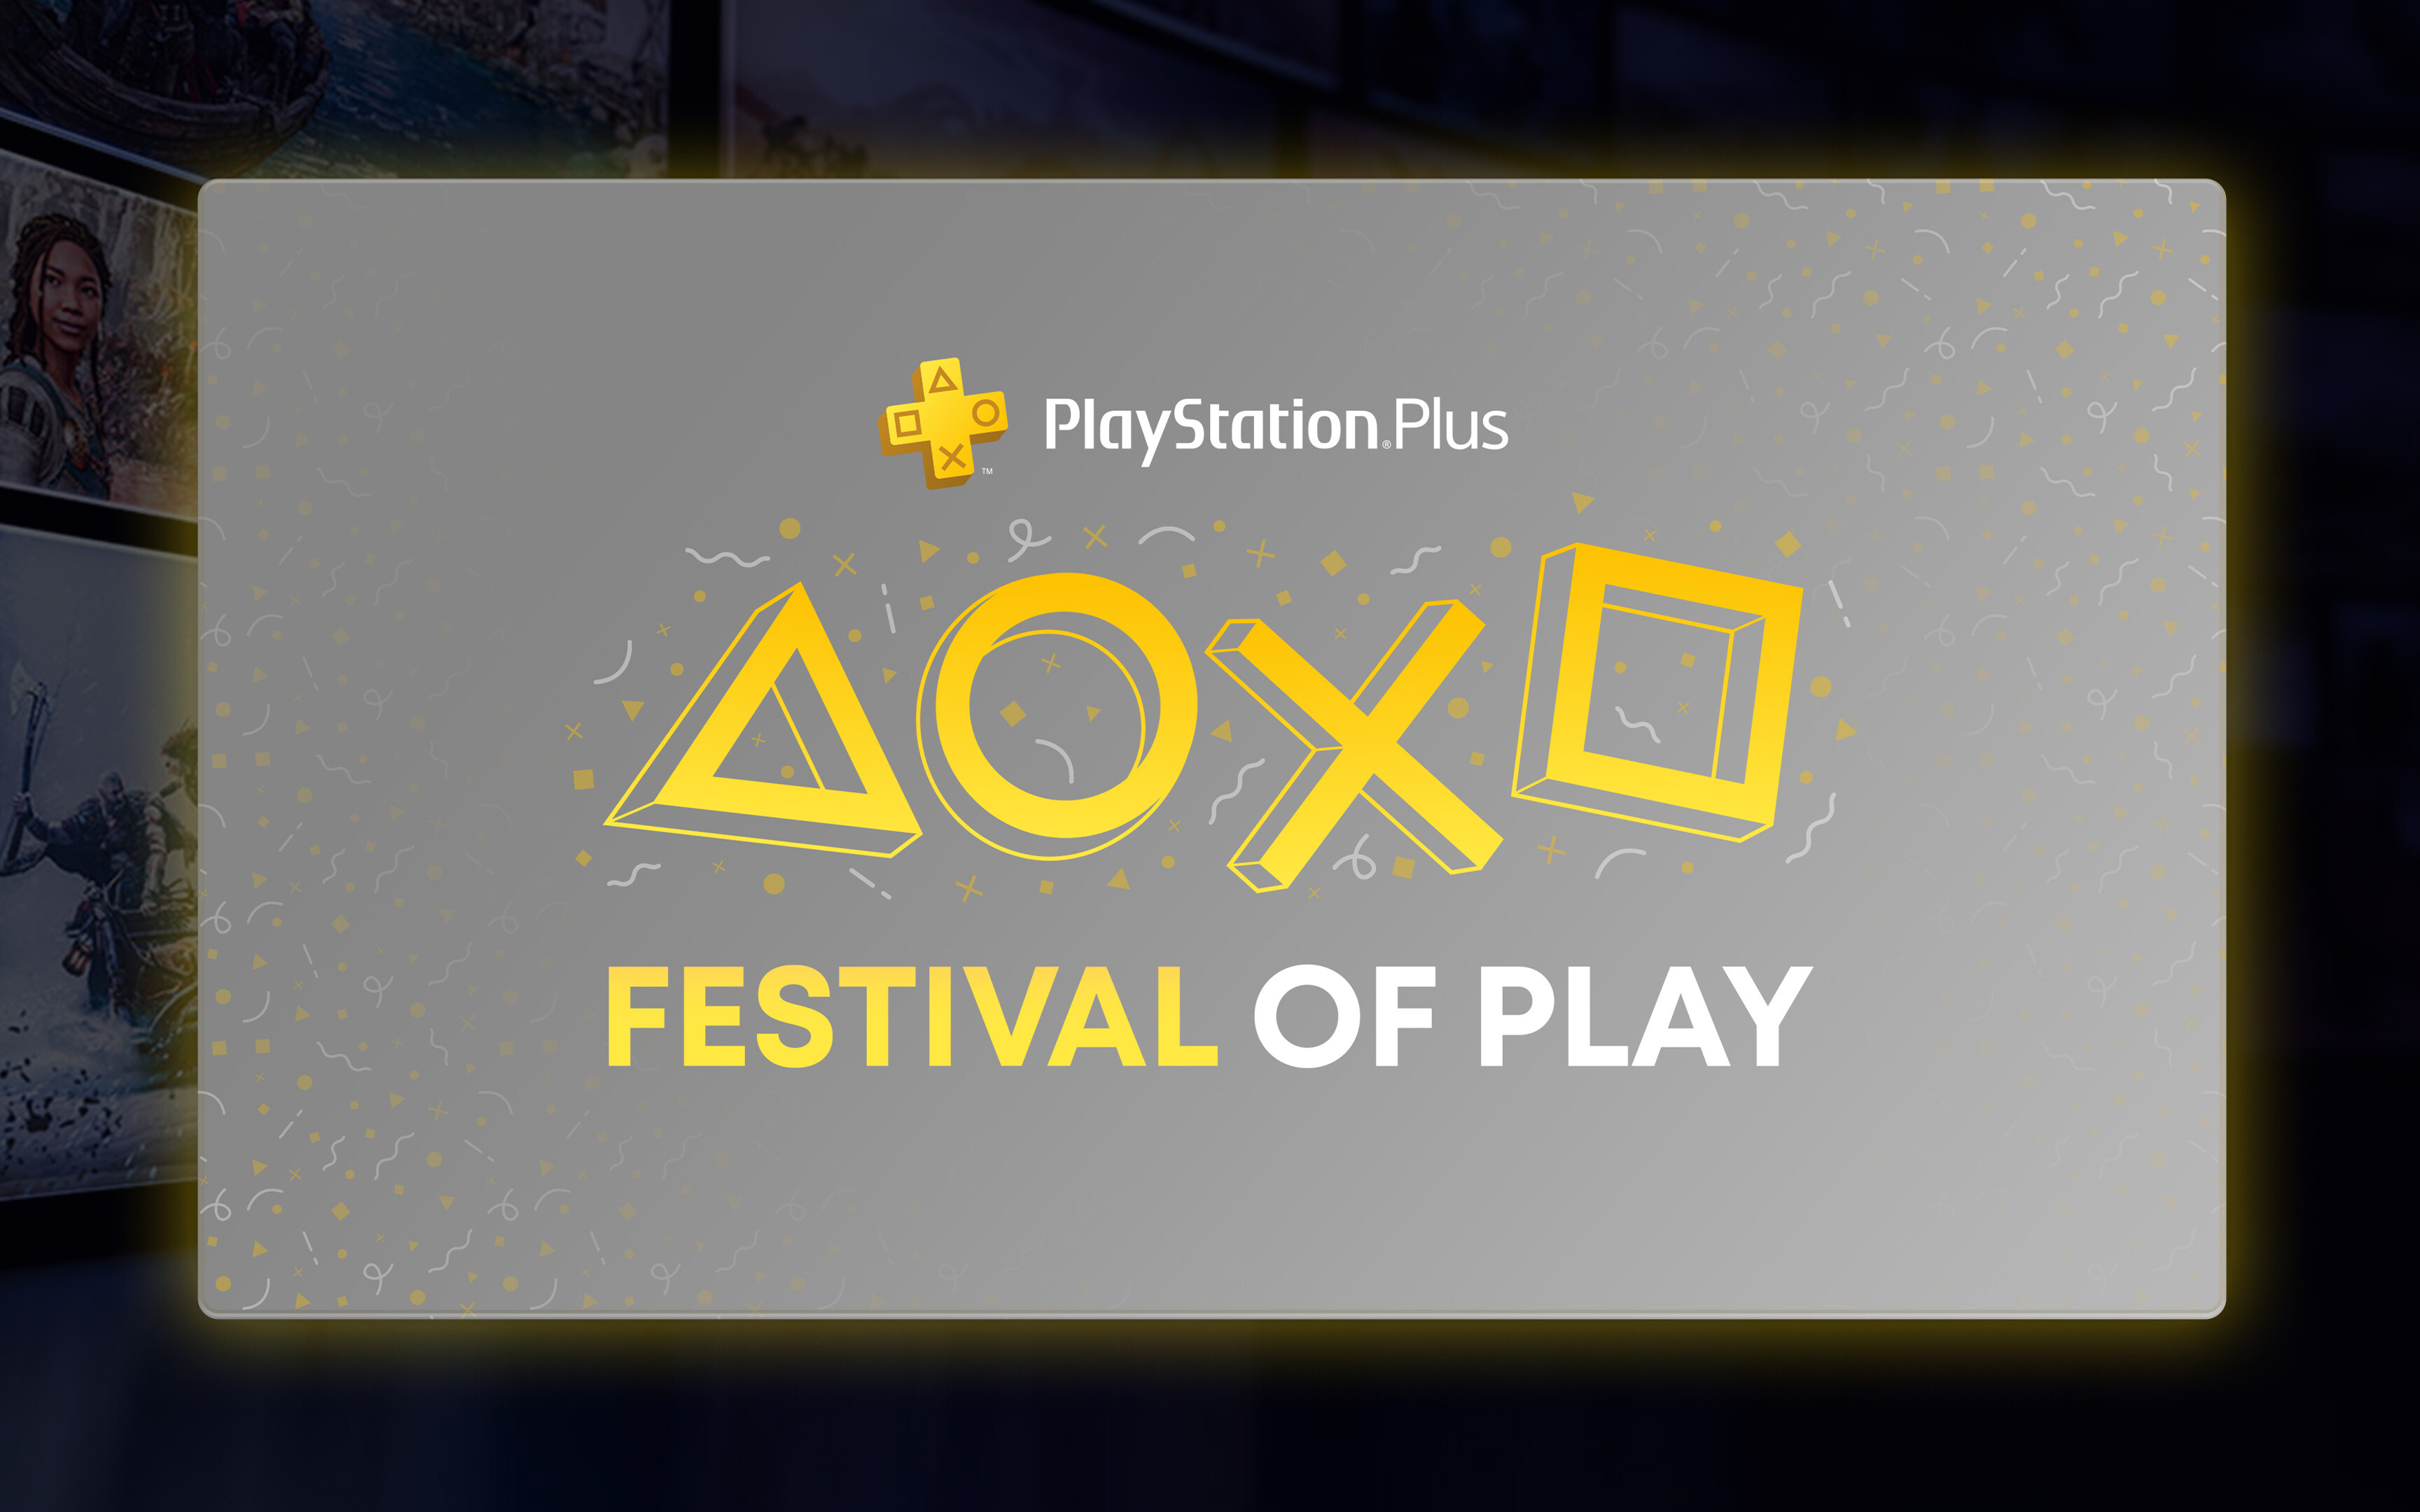 PS Plus Festival of Play 